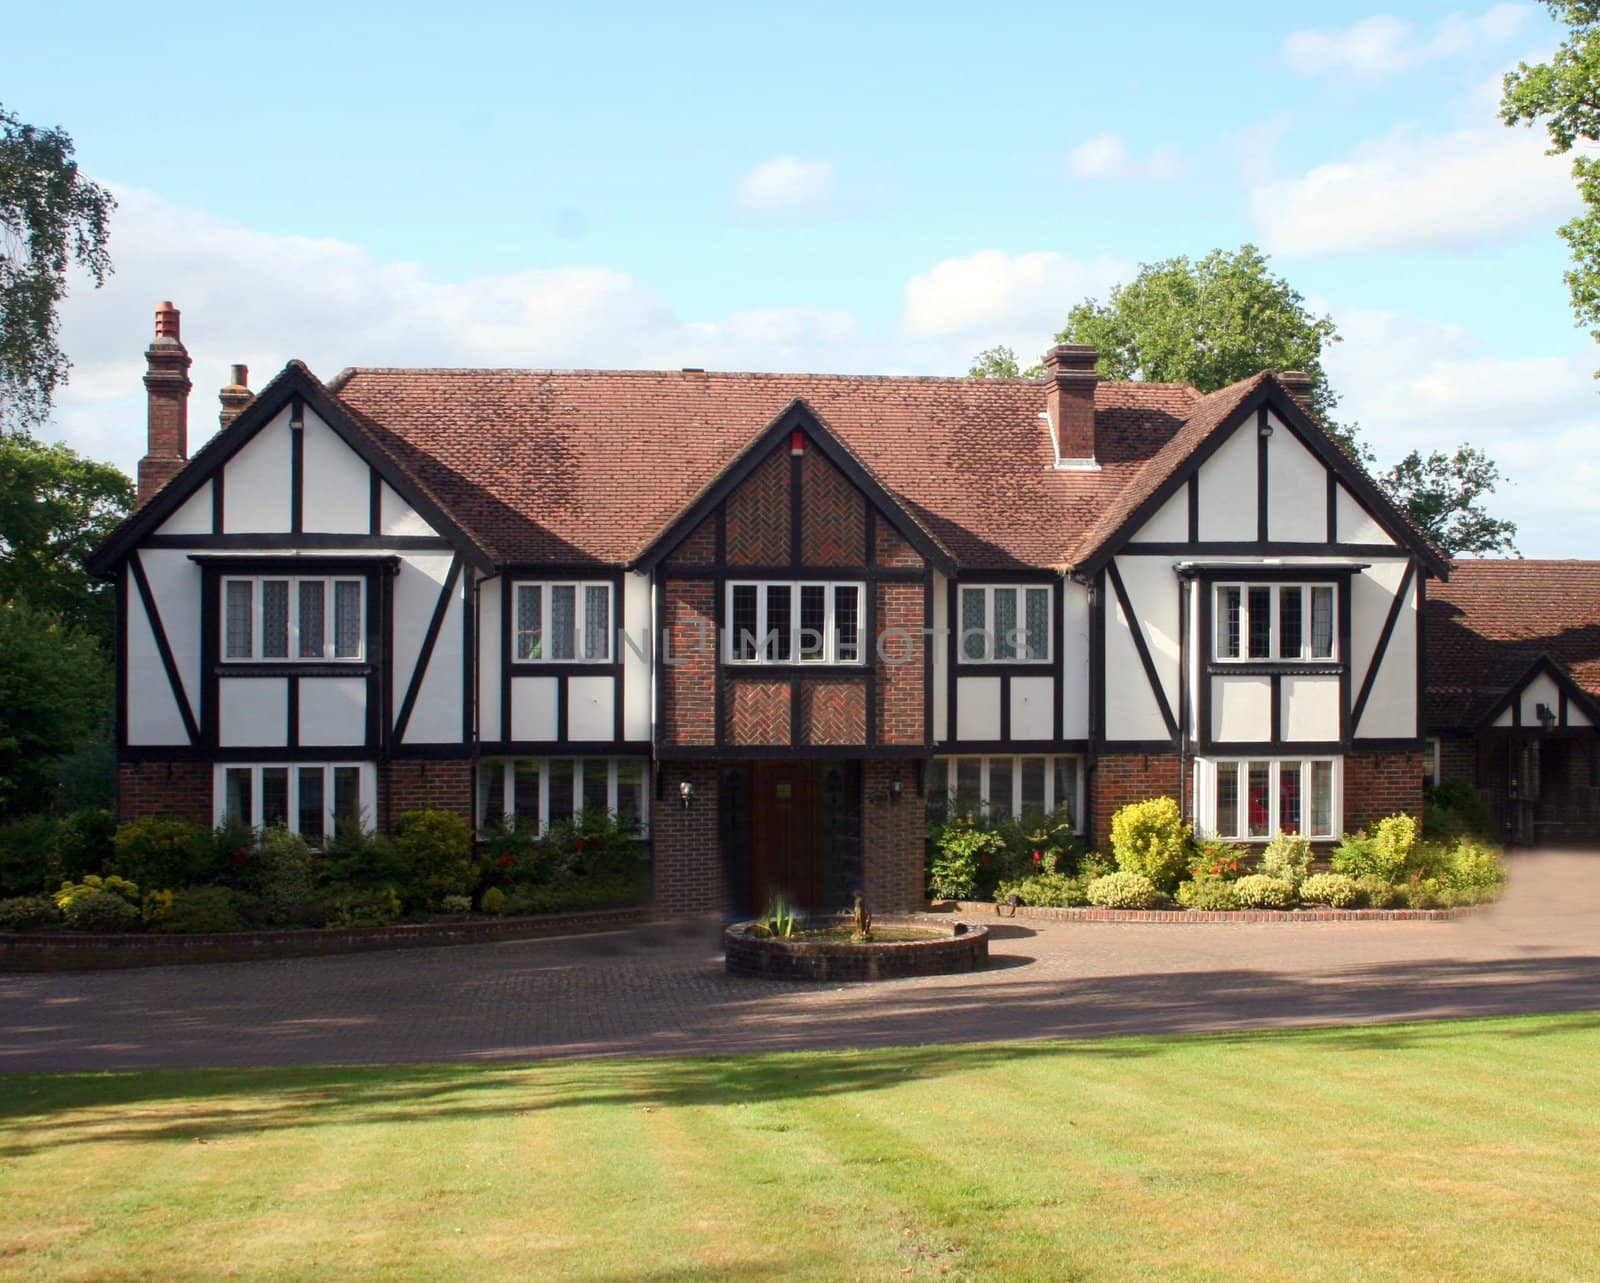 A Large Estate home, tudor style, in the UK.